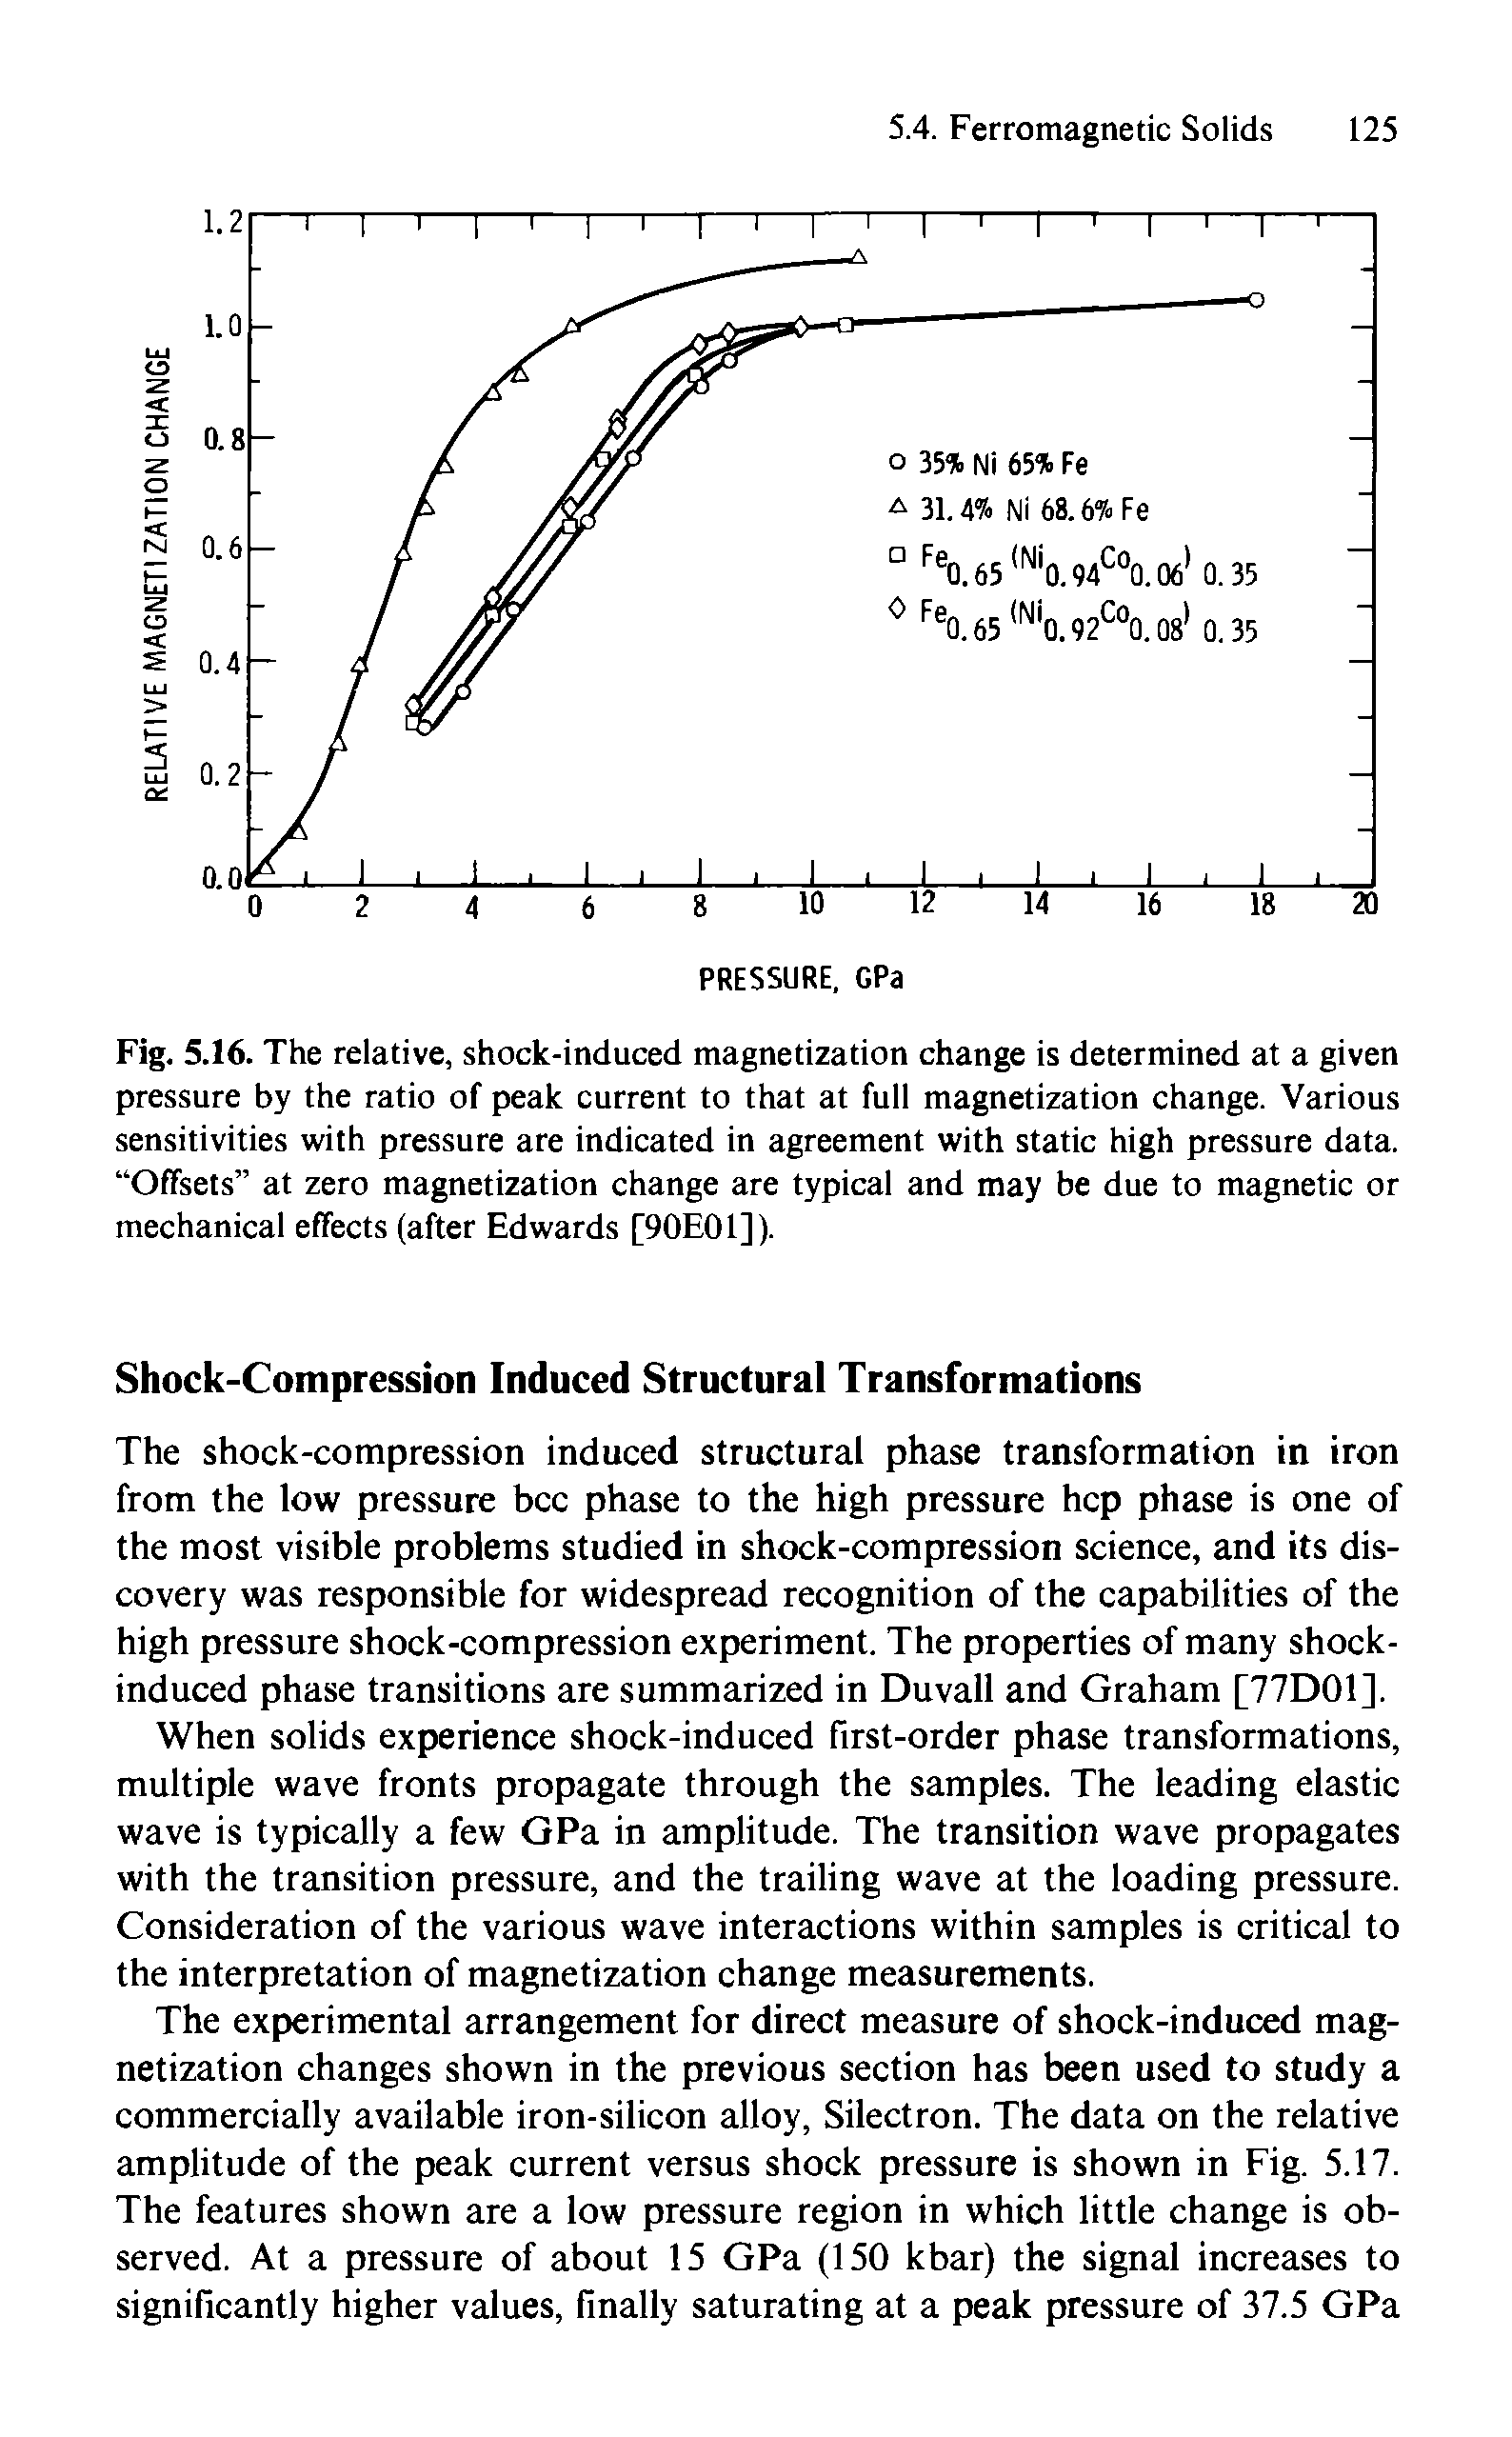 Fig. 5.16. The relative, shock-induced magnetization change is determined at a given pressure by the ratio of peak current to that at full magnetization change. Various sensitivities with pressure are indicated in agreement with static high pressure data. Offsets at zero magnetization change are typical and may be due to magnetic or mechanical effects (after Edwards [90E01]).